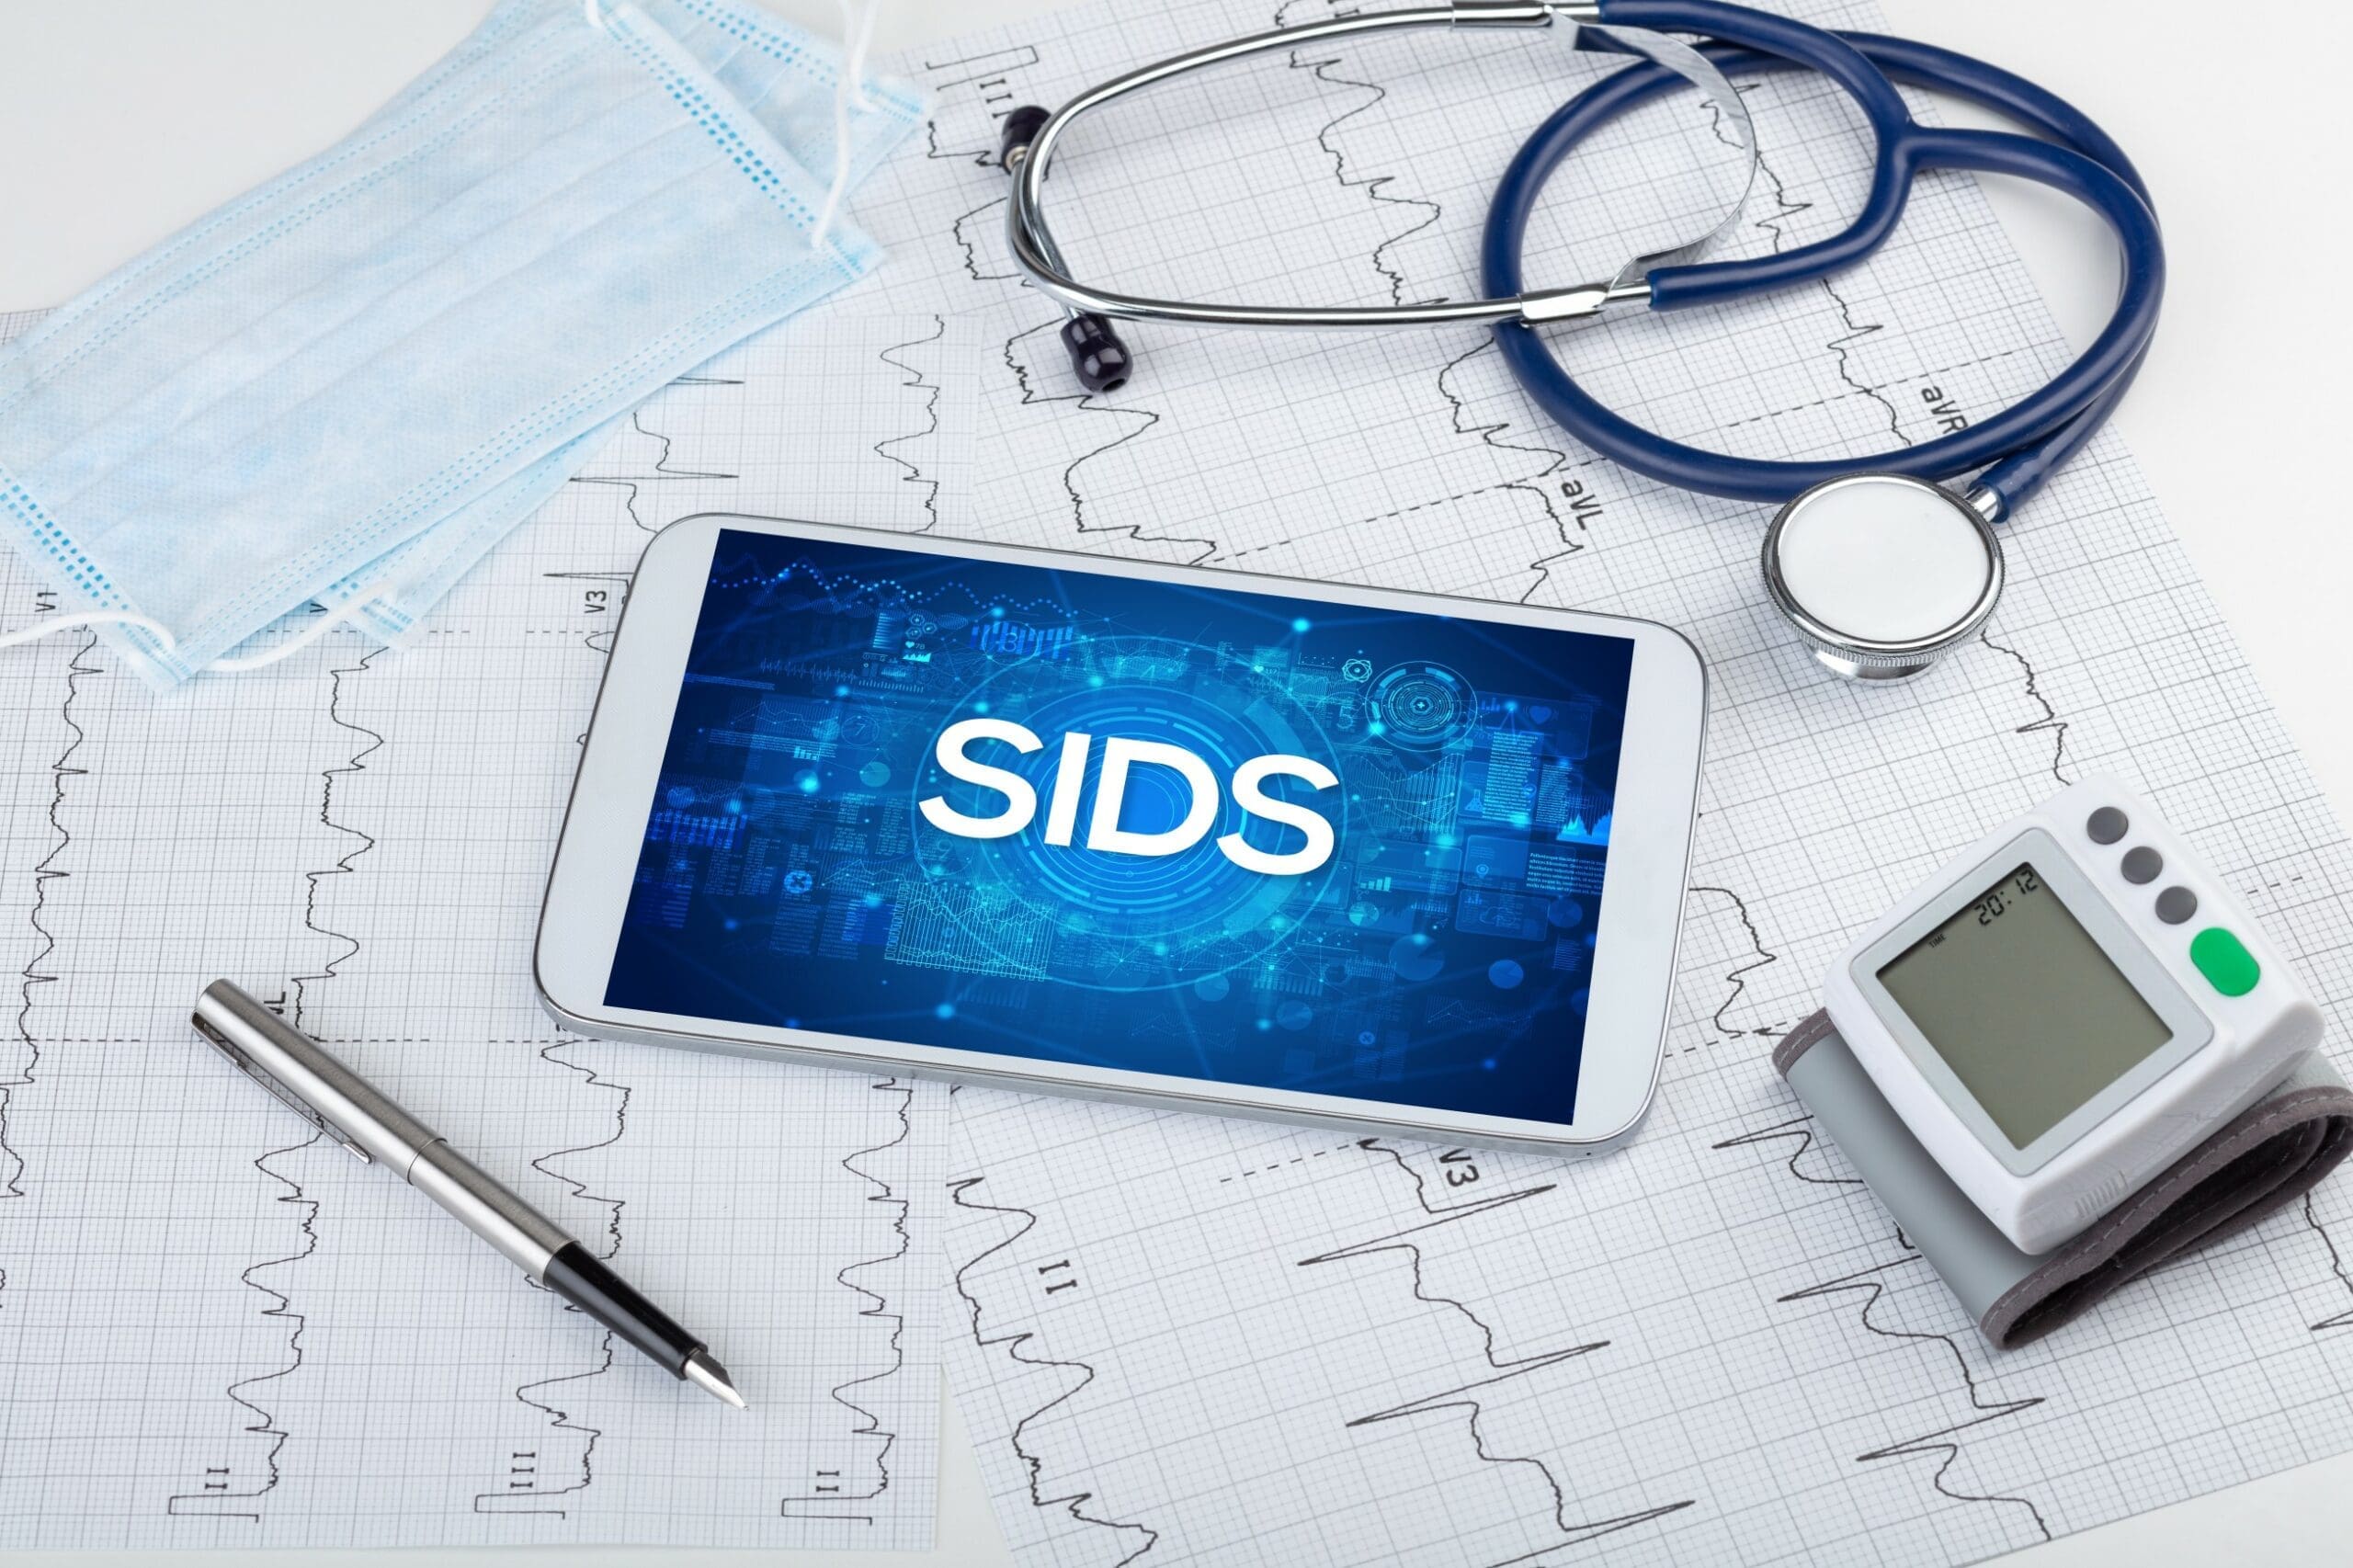 SIDS: frequently asked questions